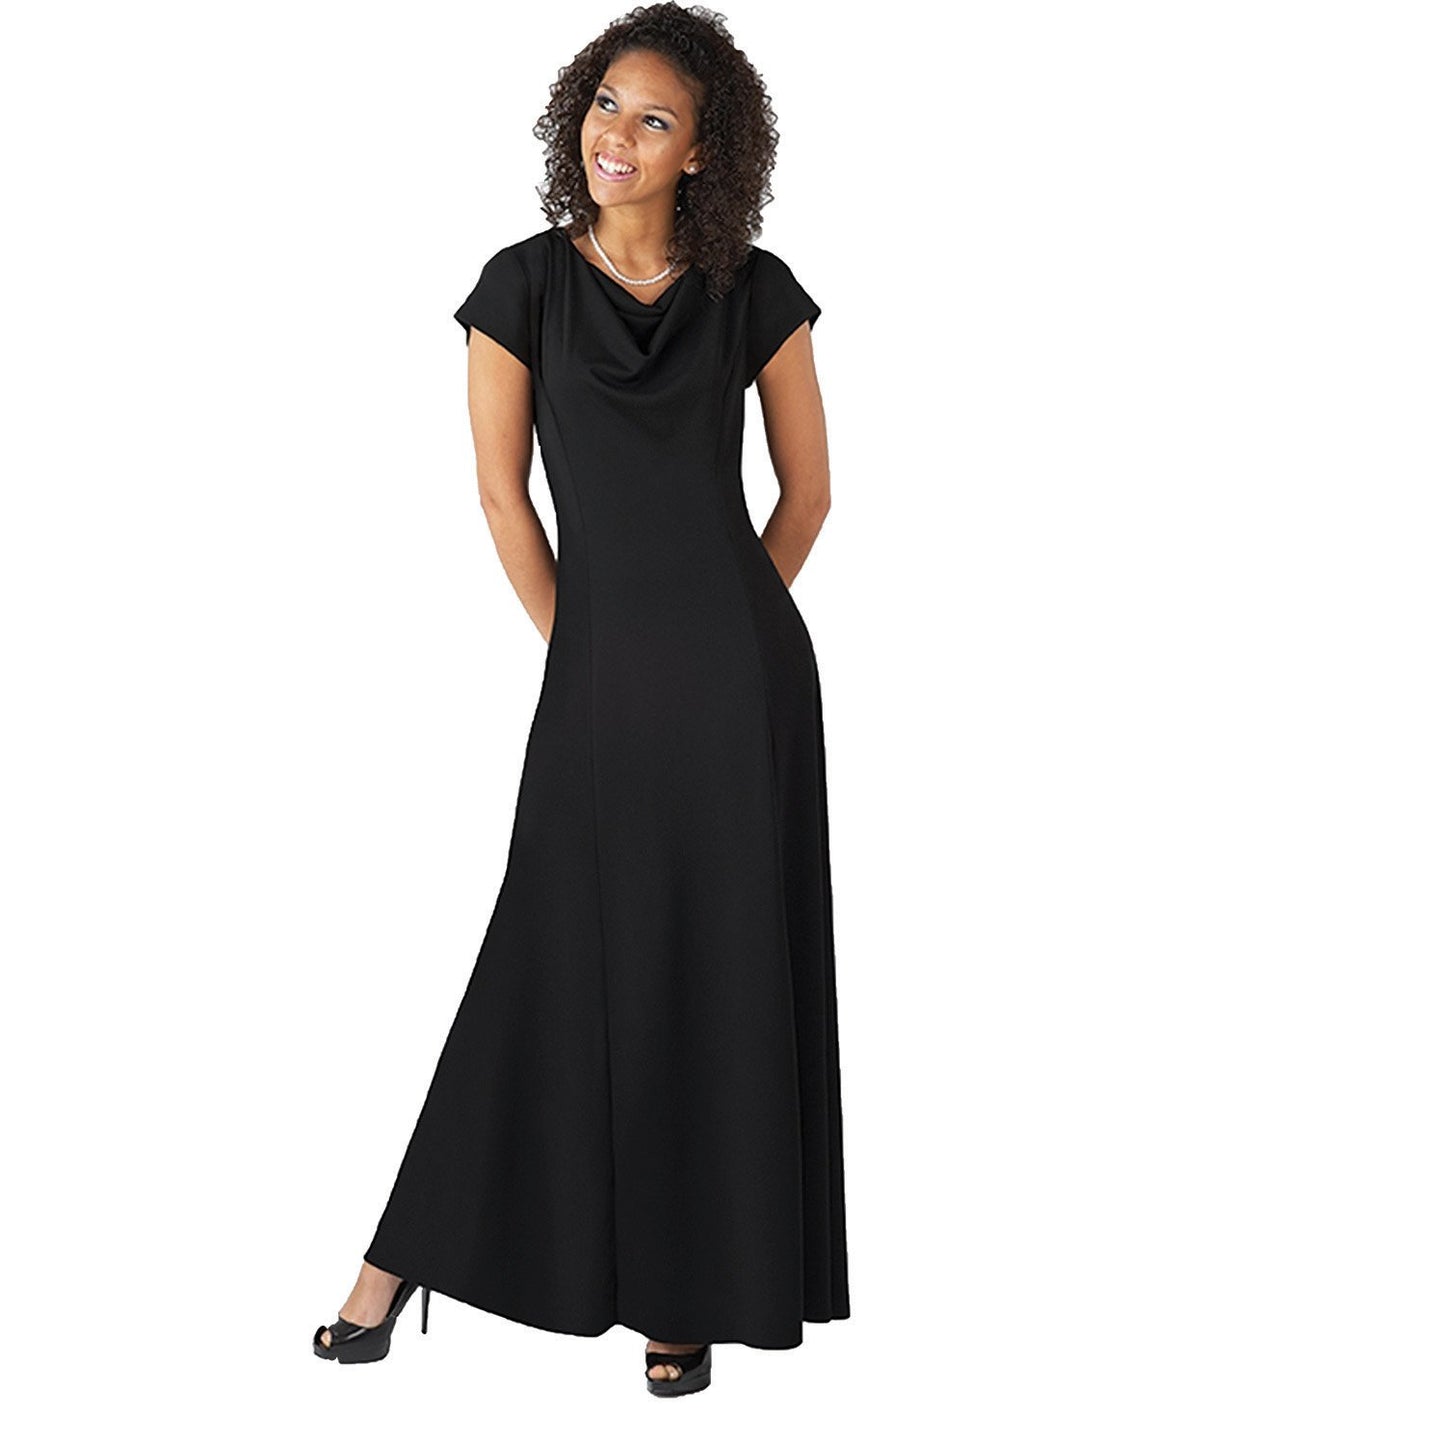 Pippa Cowl Neck Dress (Adult & Youth)